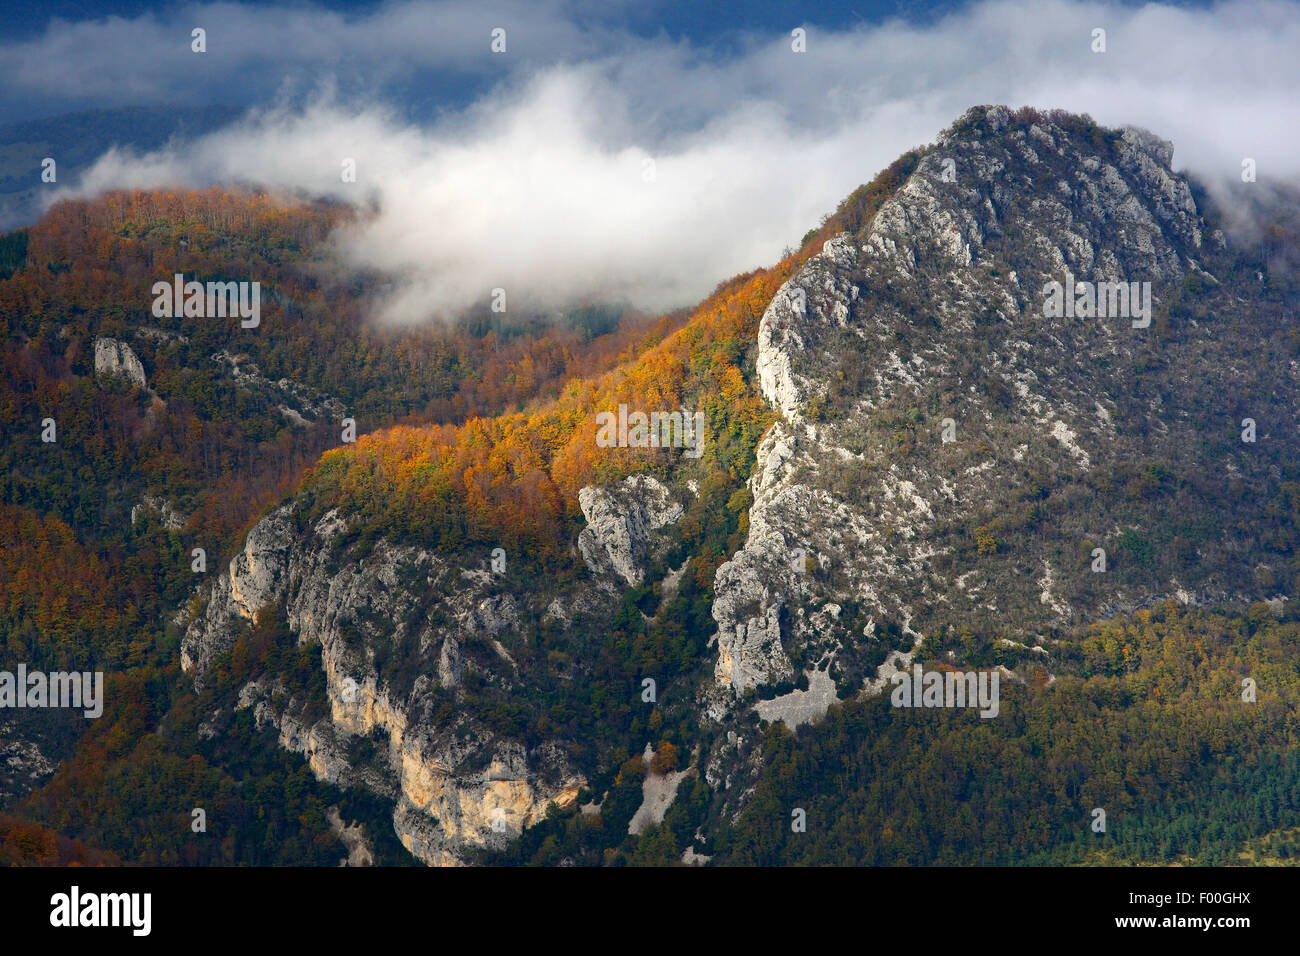 Mountain peaks and rocks in mist in autumn, France, Vercors National Park Stock Photo